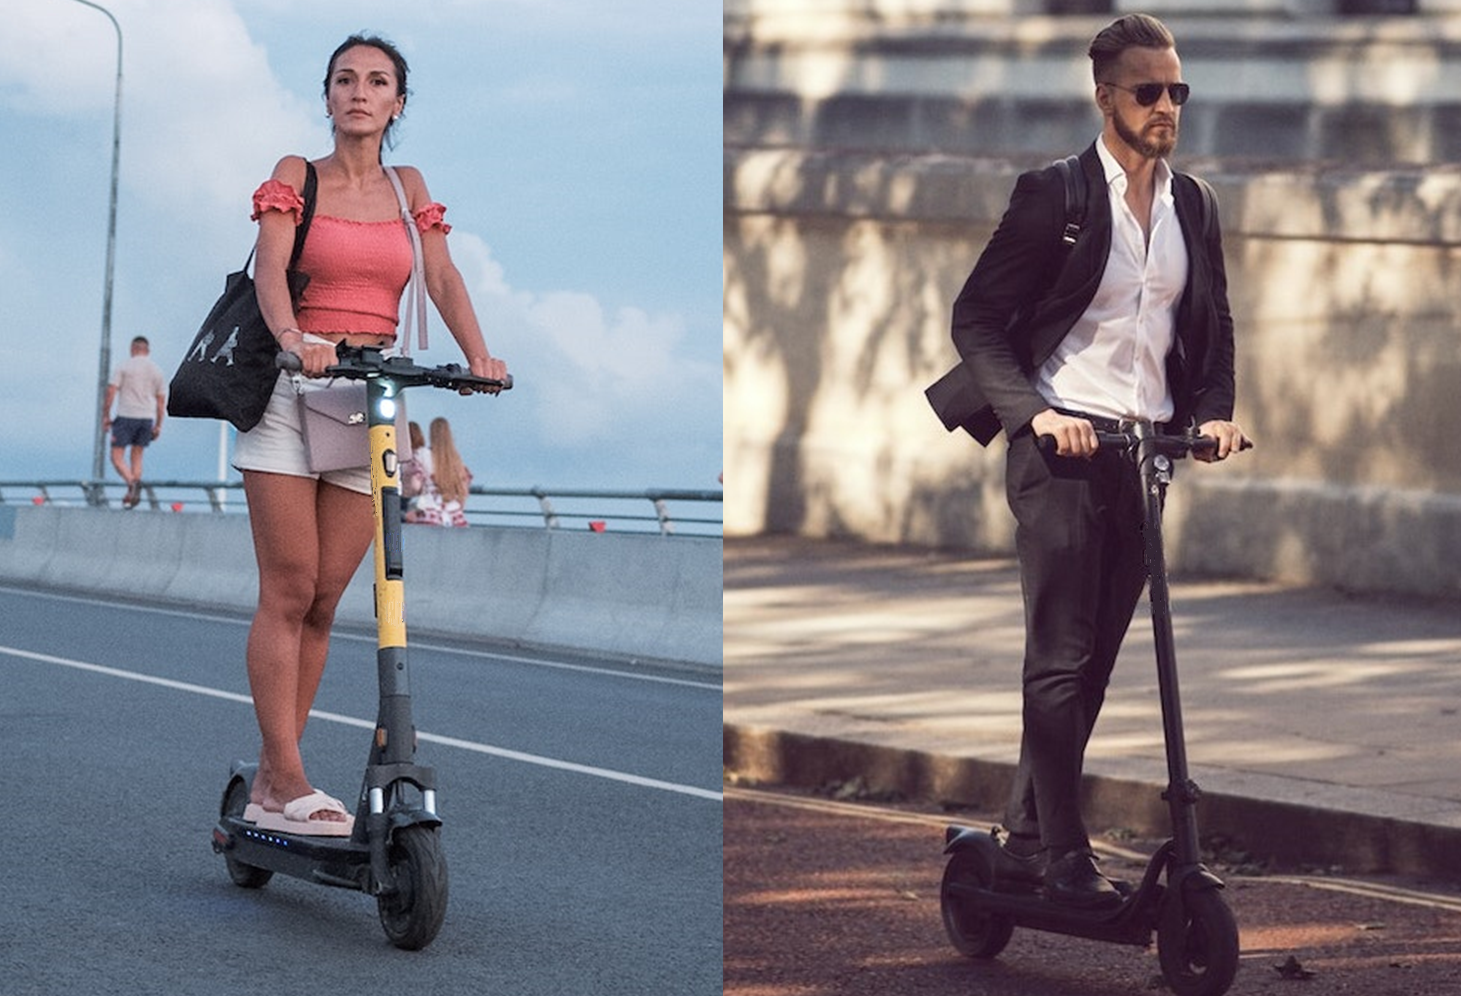 Young professional urban commuters riding electric scooters